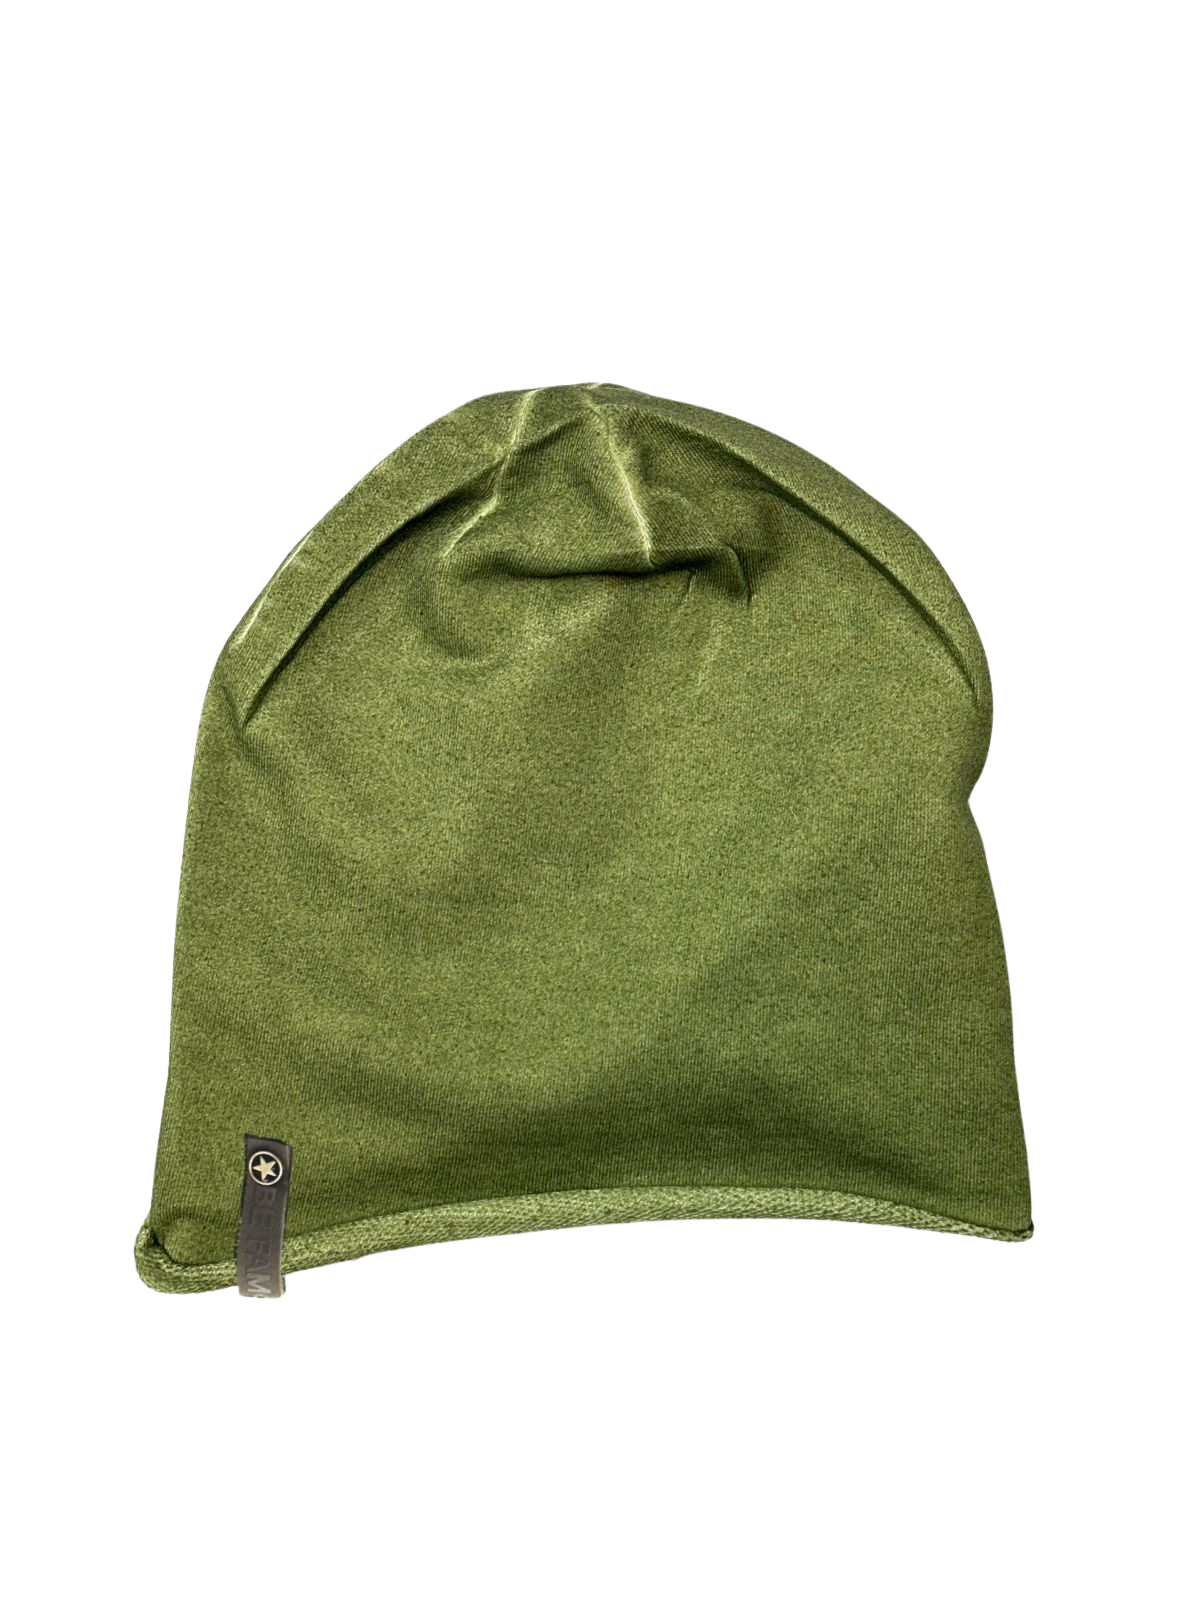 Be Famous Washed Raw Cut Washed Sweat Beanie, Jb02W Olive Wash